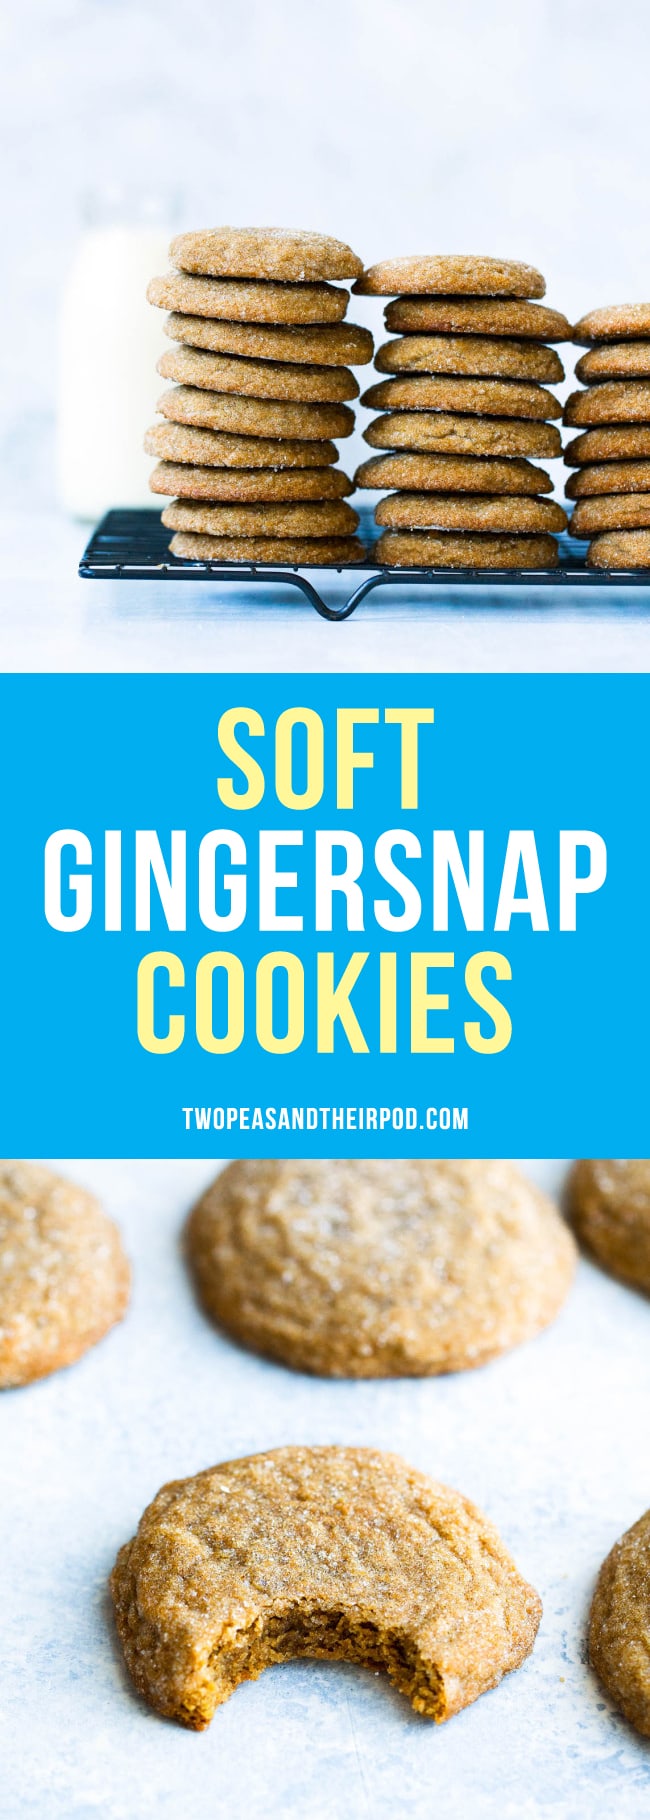 Soft Gingersnap Cookies are the perfect Christmas and holiday cookie! They are super soft and perfectly spiced! #cookies #Christmas #holiday #Christmascookie 